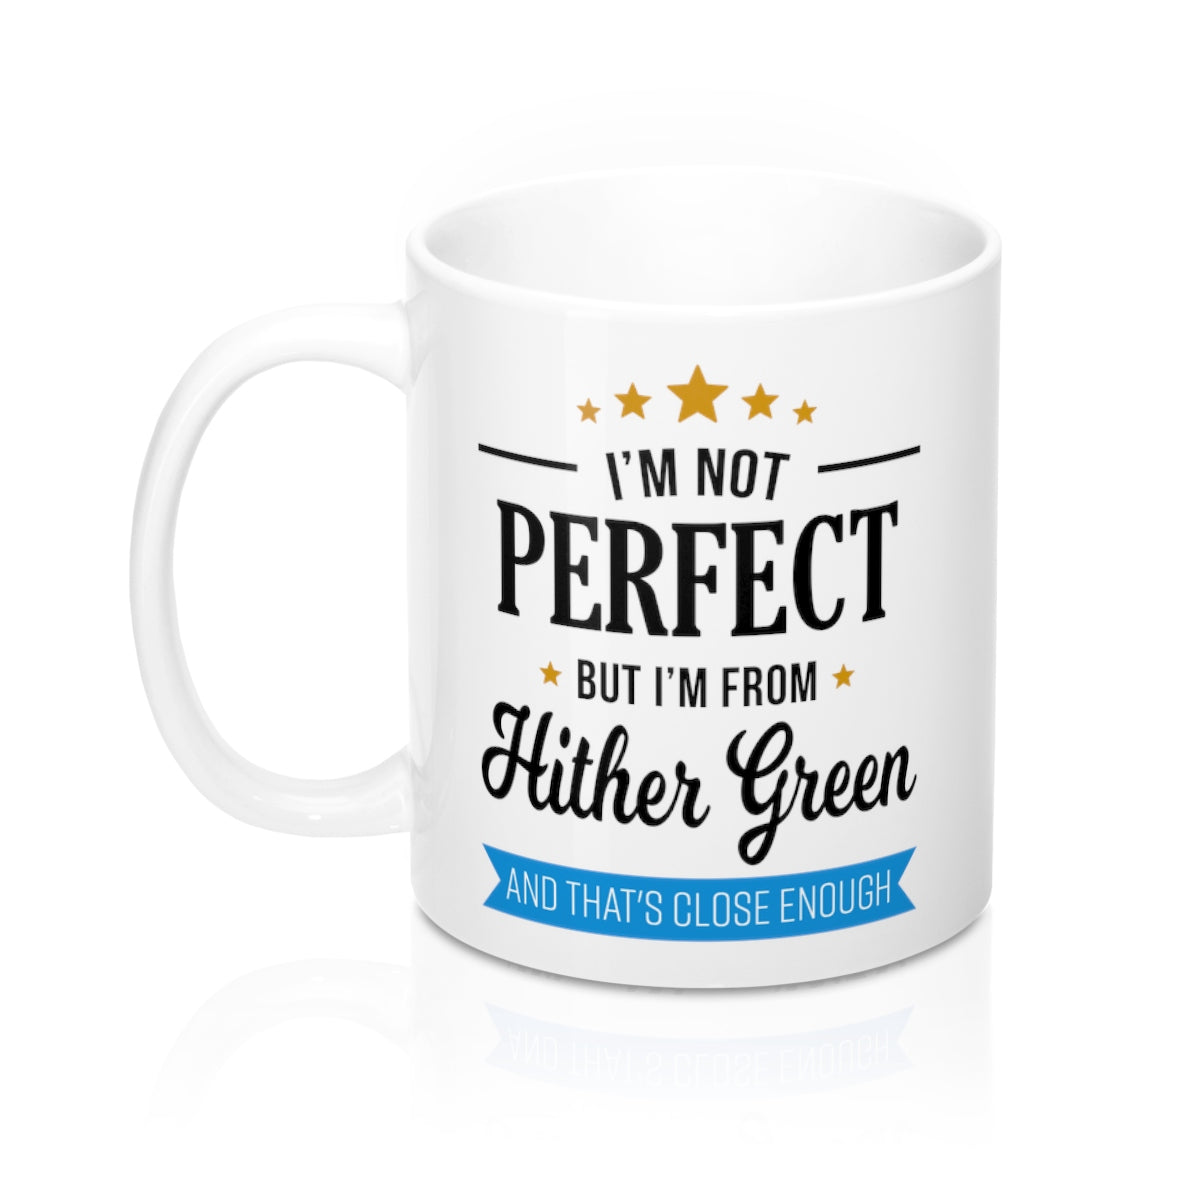 I'm Not Perfect But I'm From Hither Green Mug